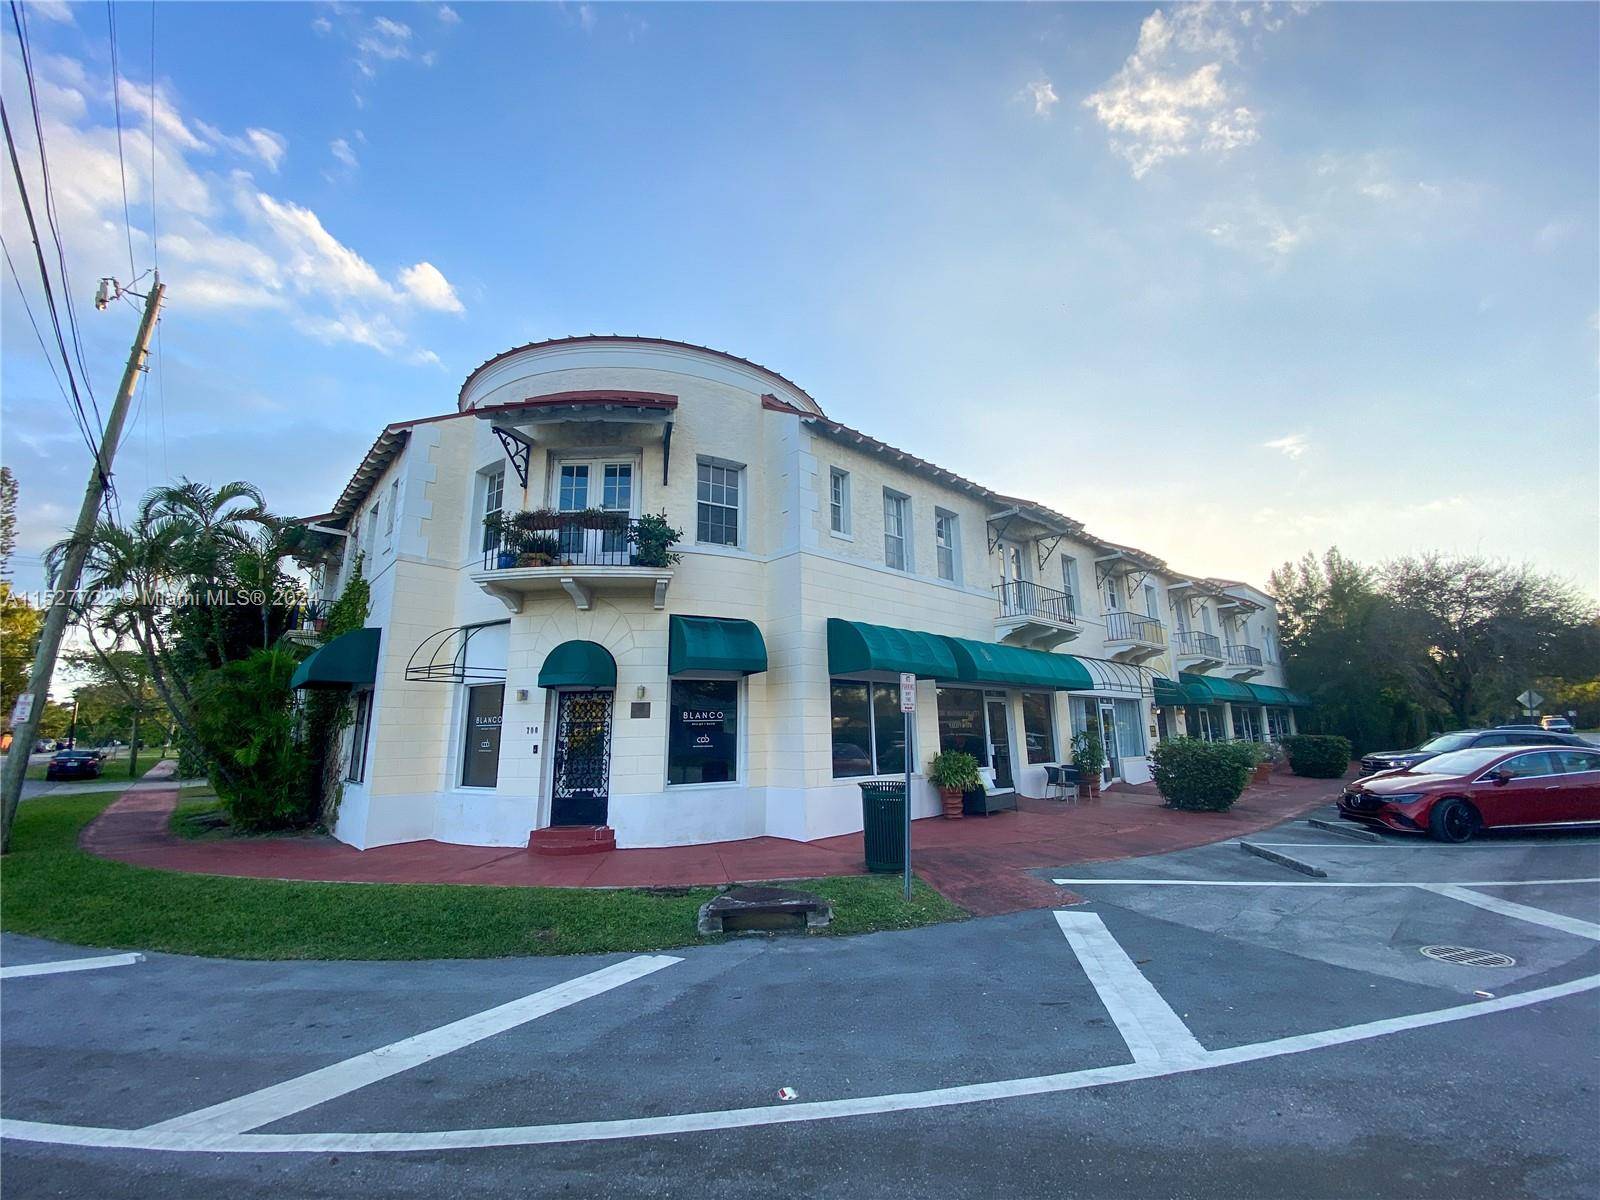 Amazing retail space located in one of the most beautiful neighborhood in Miami Beach.